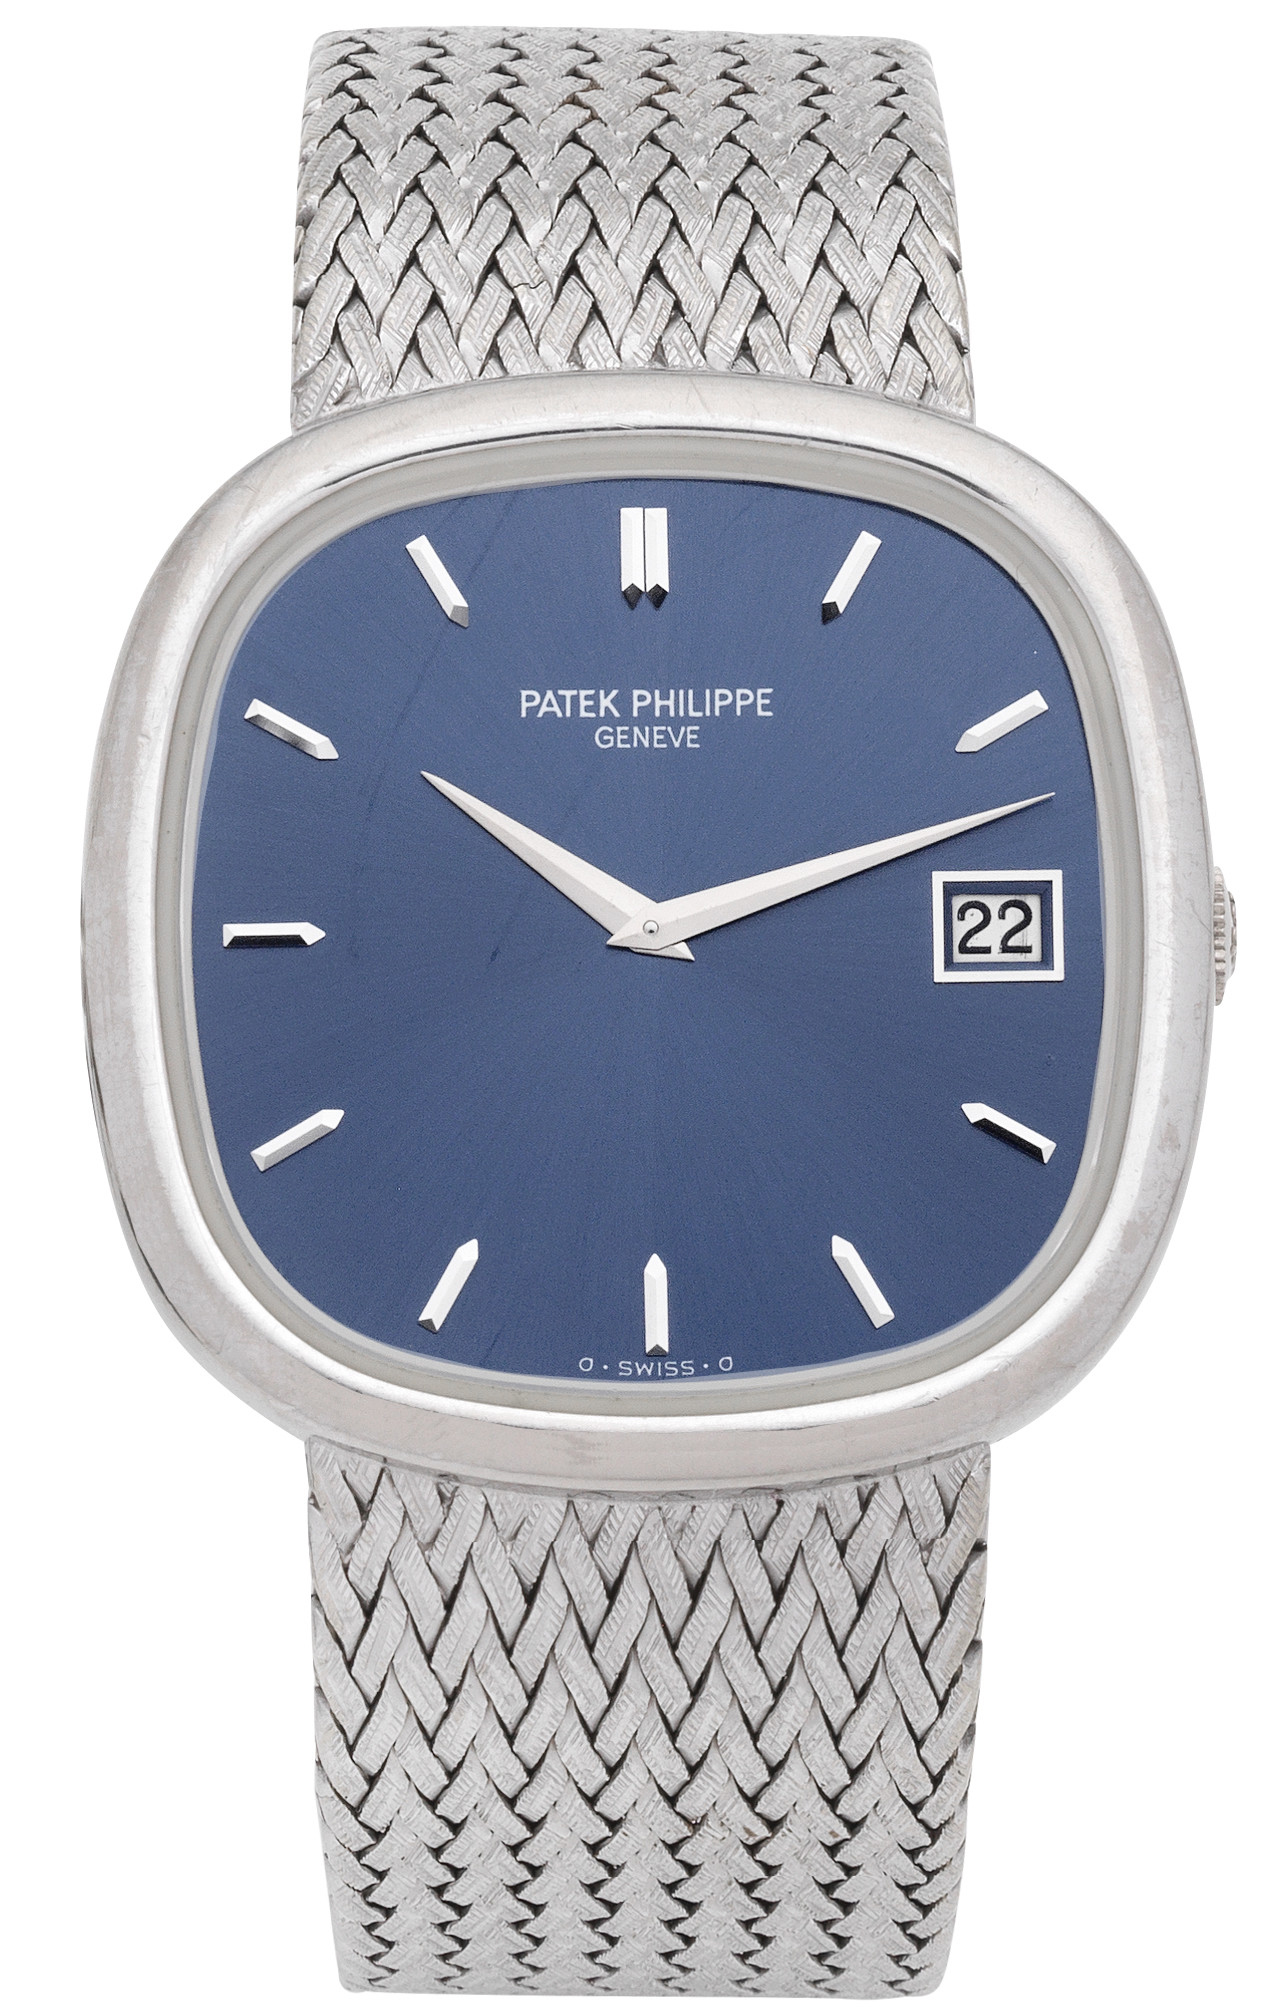 Bonhams patek philippe ellipse 18k white gold automatic calendar bracelet watch with sigma dial offered with an estimate of 8000 12000